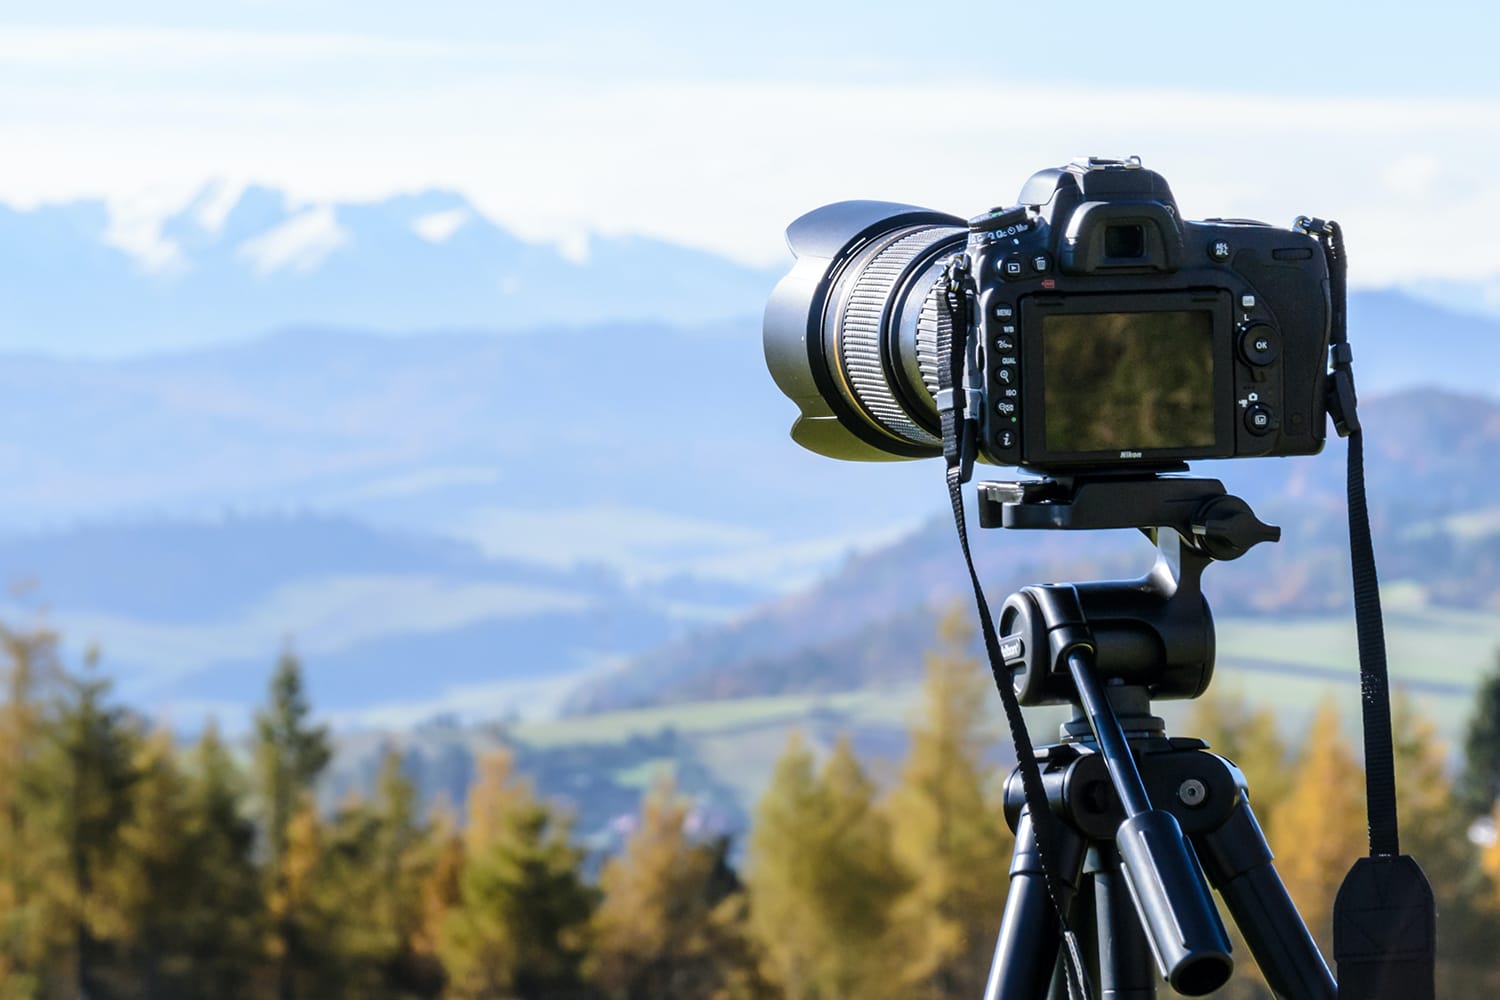 What to Look for When Shopping for the Perfect Tripod